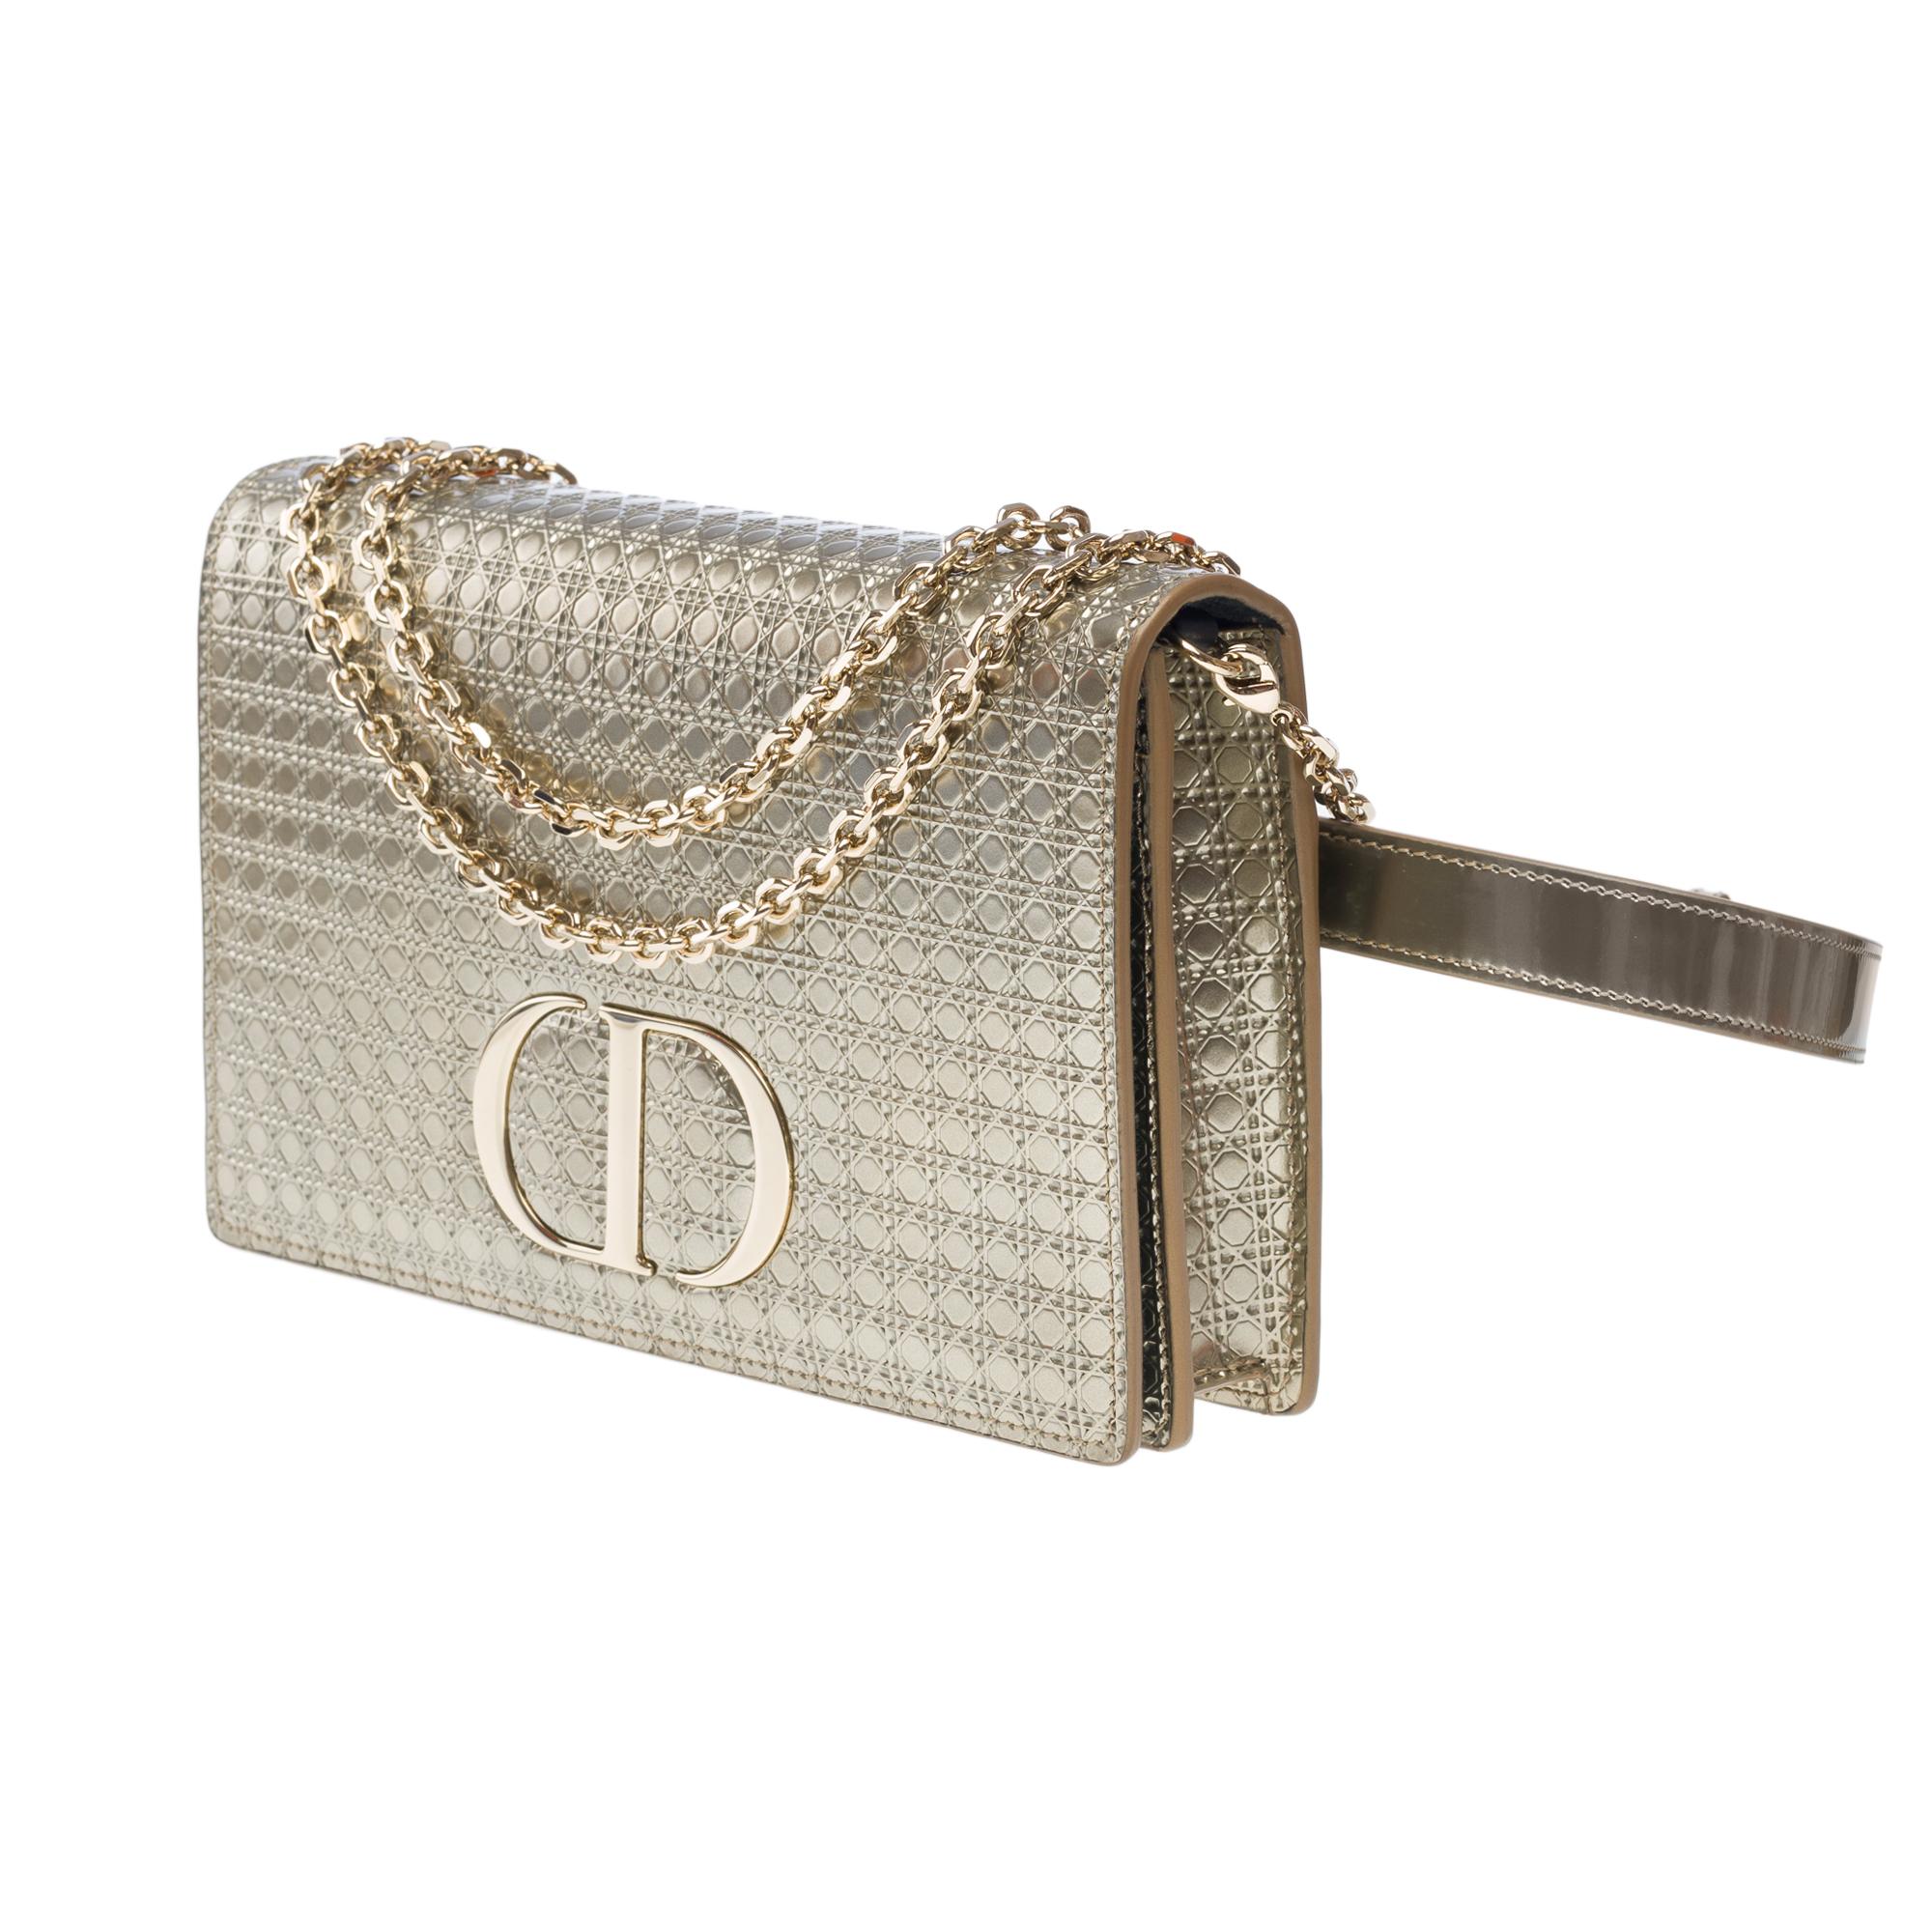 Christian Dior shoulder&belt bag 2 in 1 30 Montaigne in silver leather 2